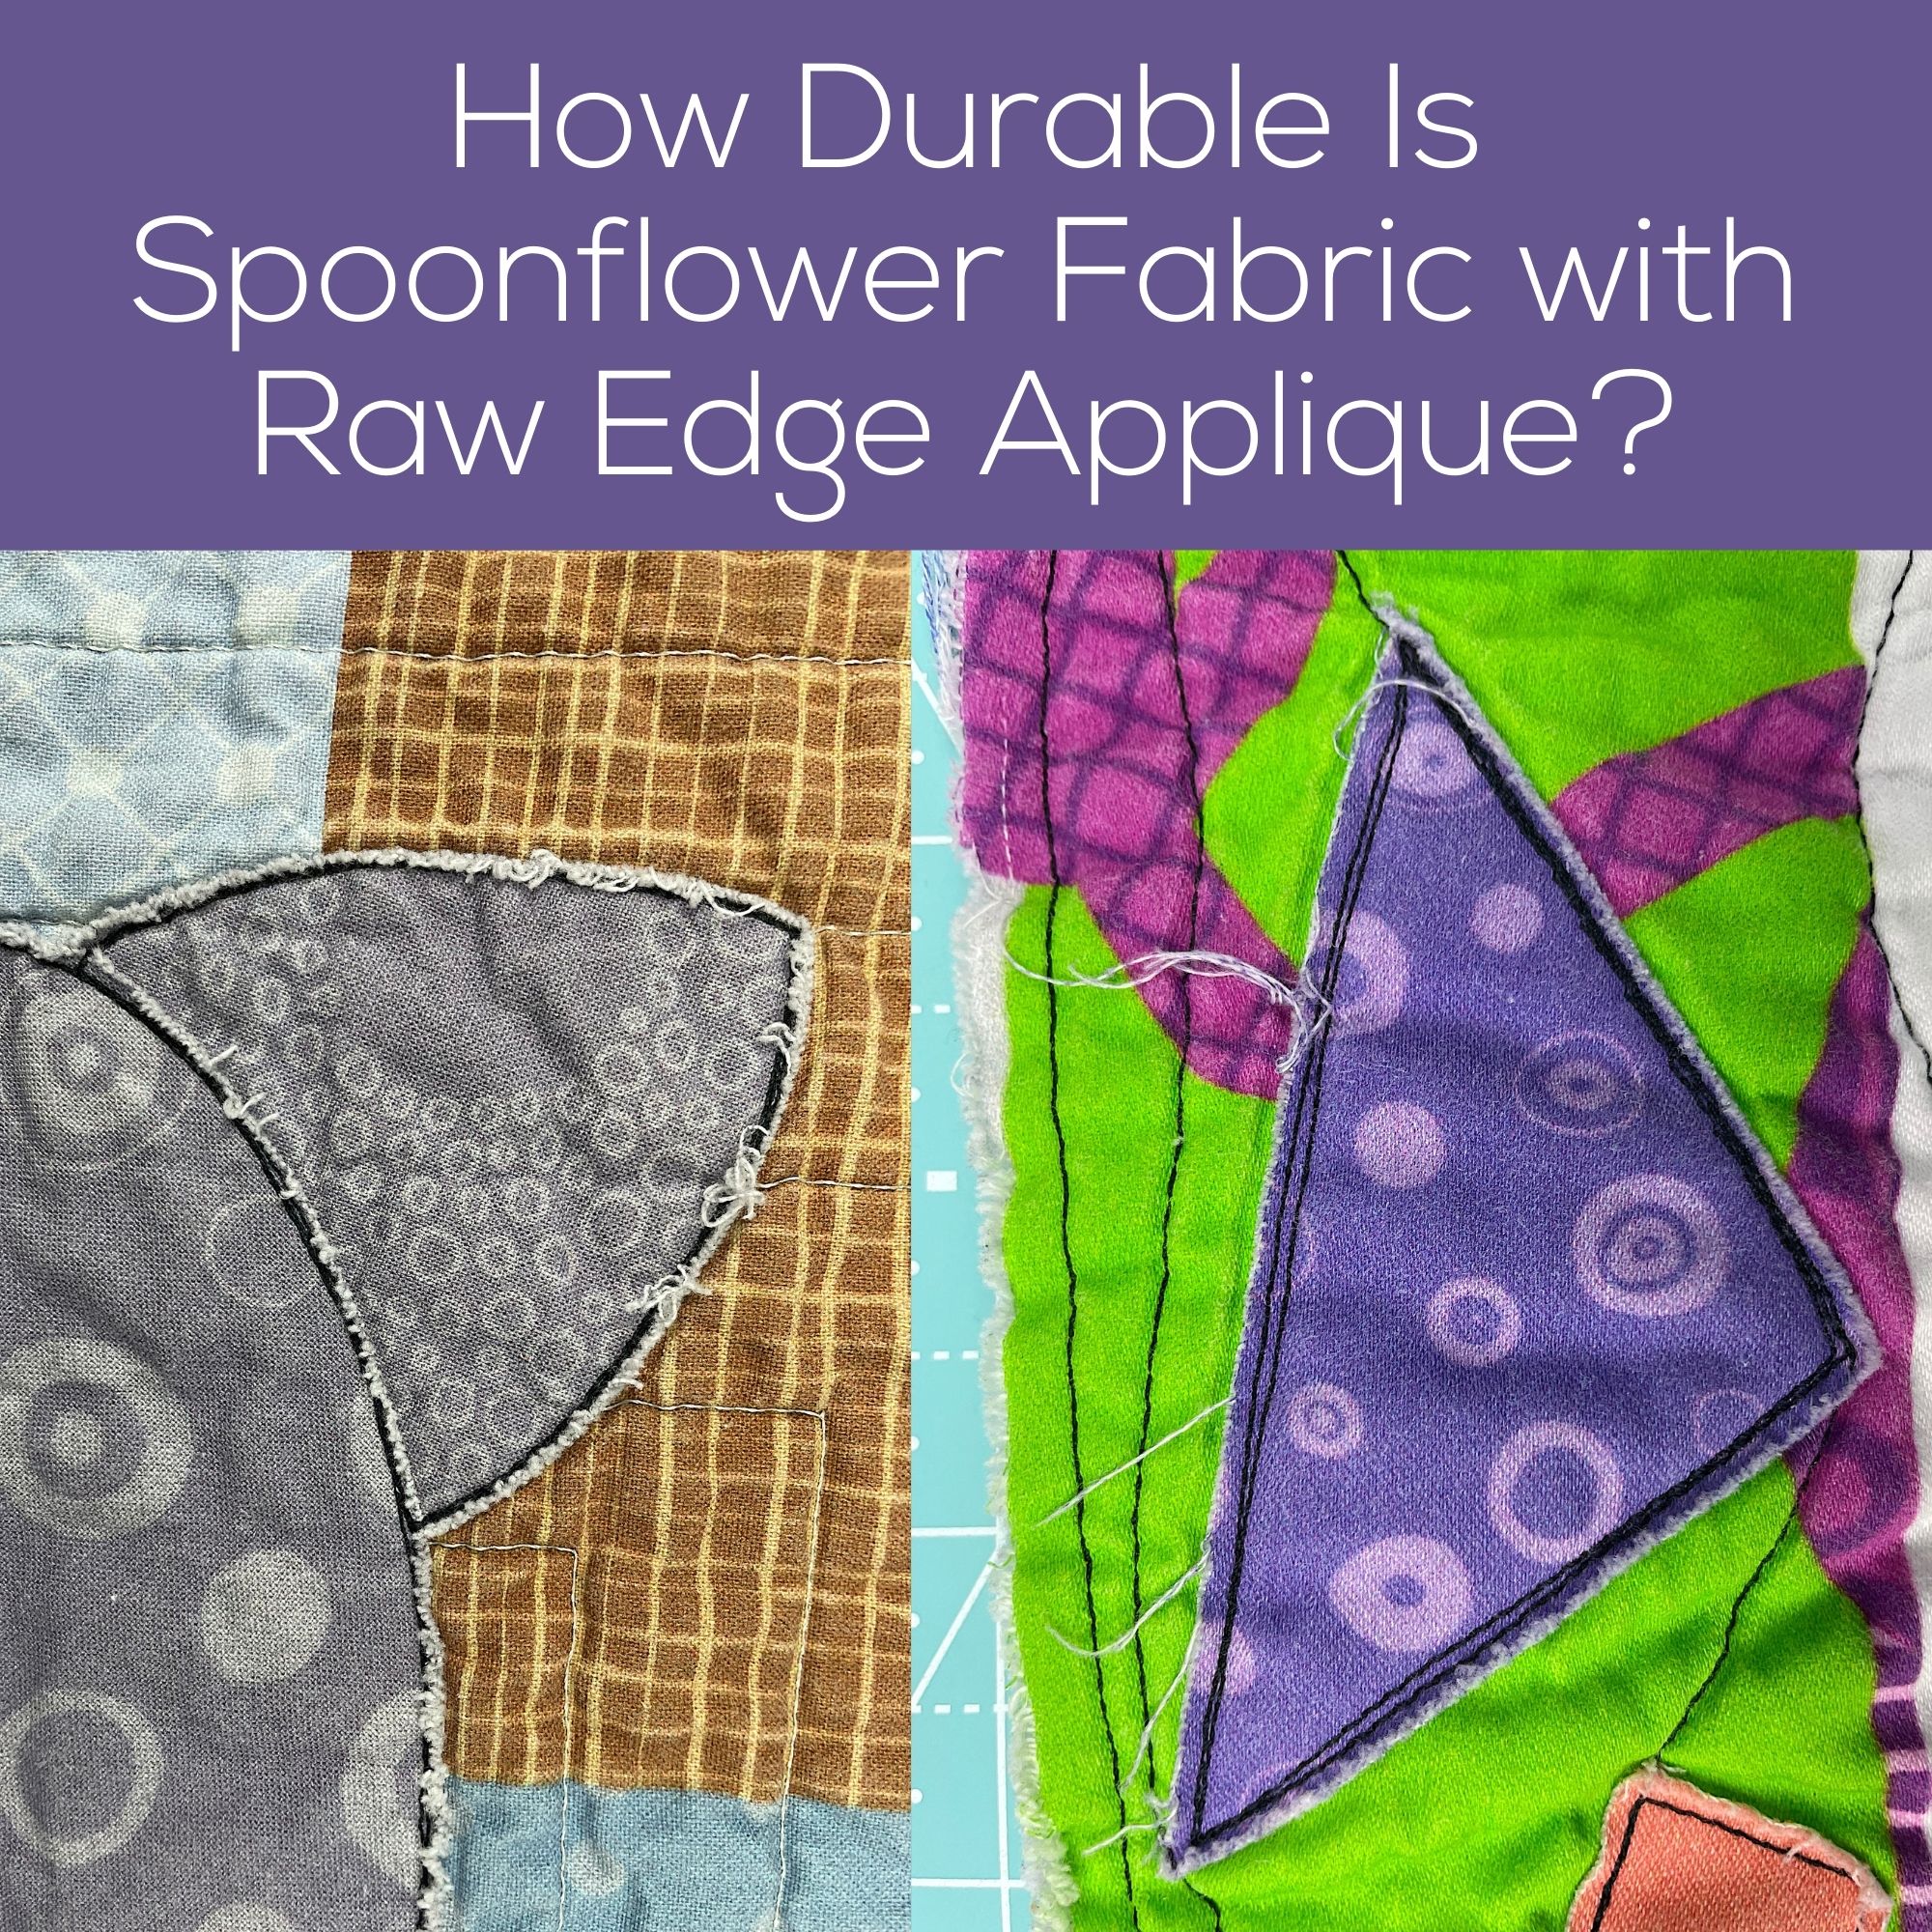 How Durable Is Spoonflower Fabric with Raw Edge Applique? - Shiny Happy  World